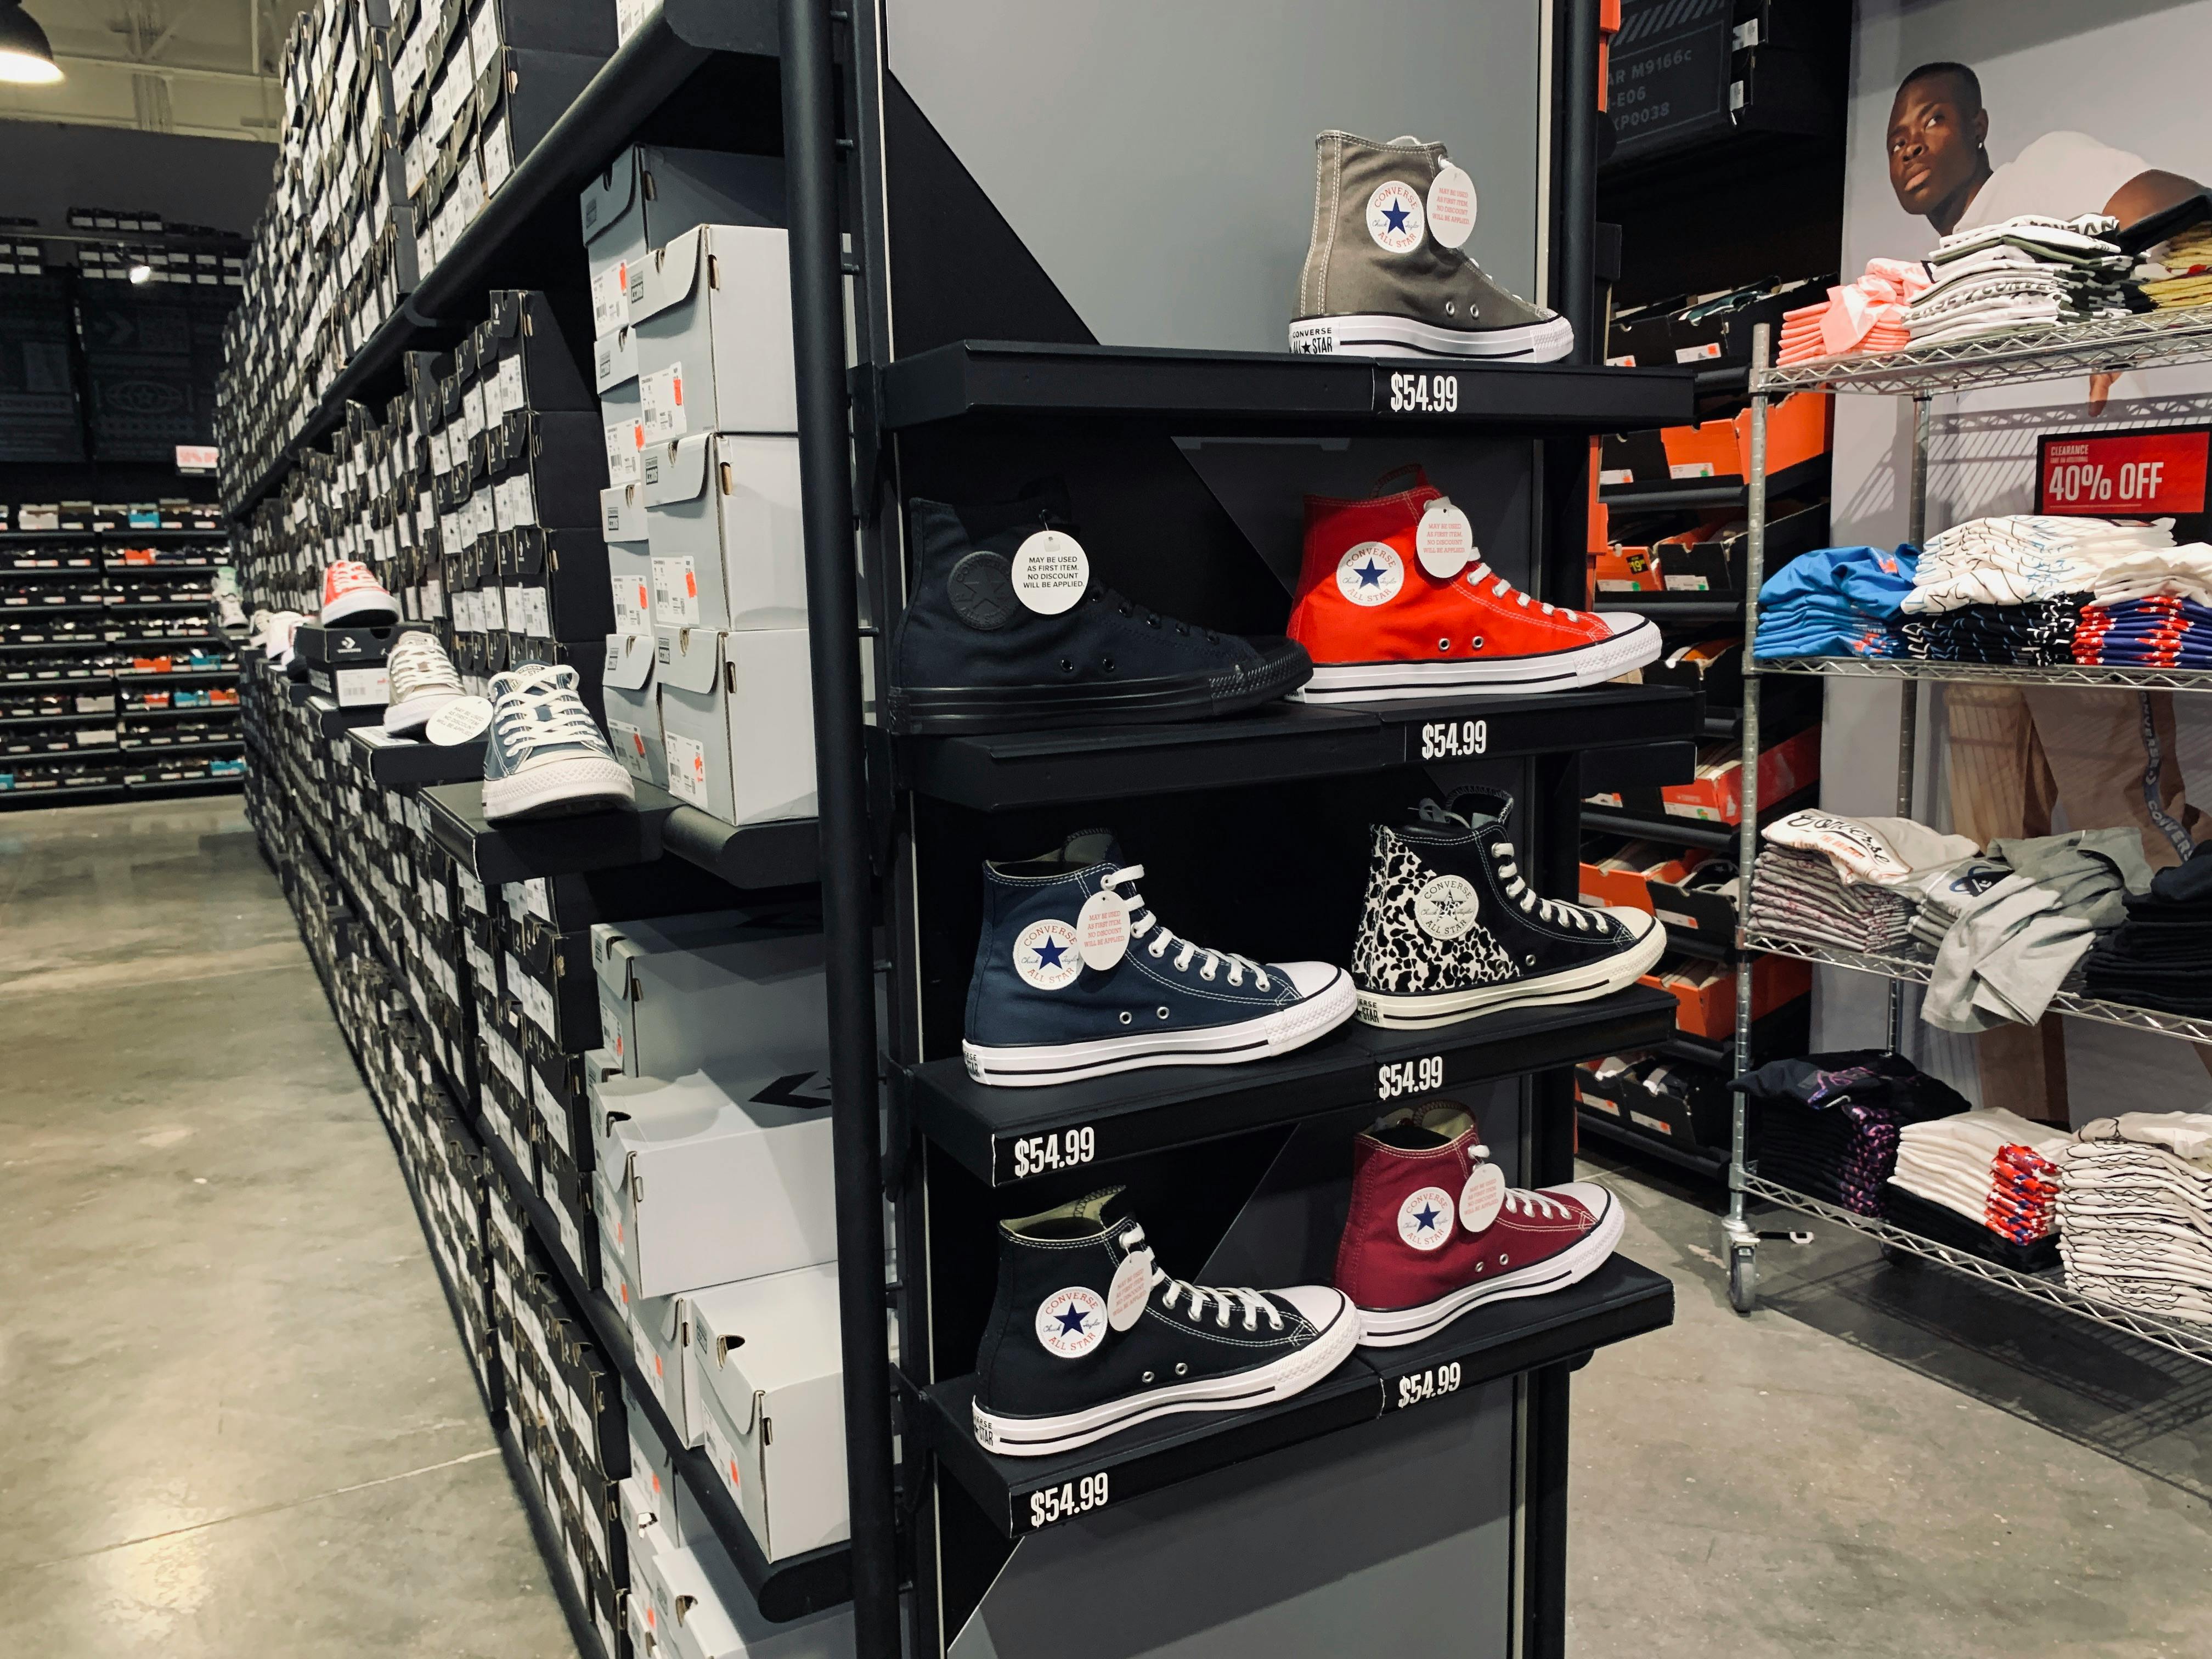 converse shoes coupons